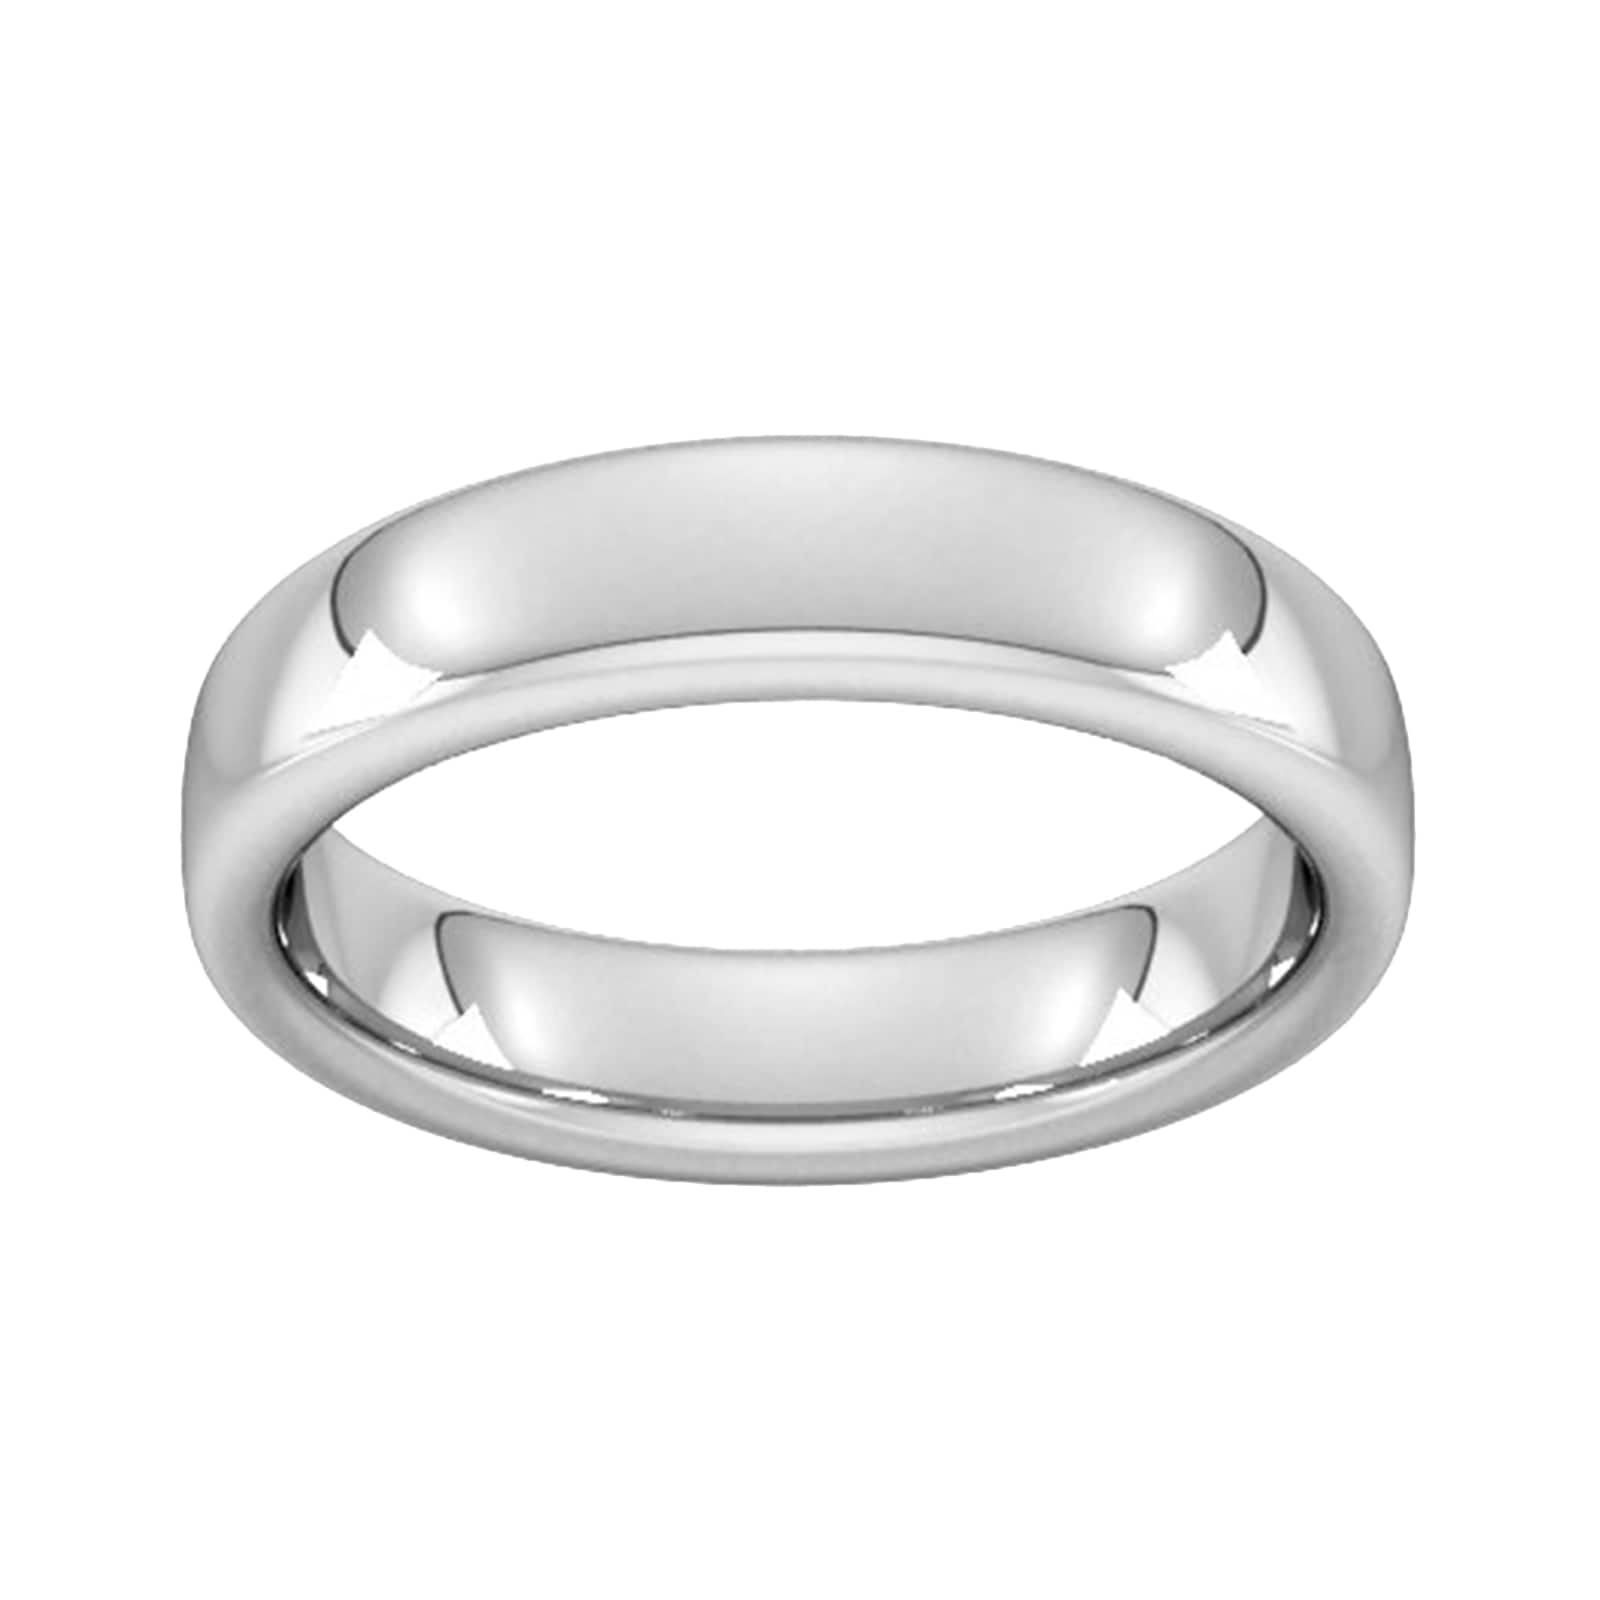 5mm Slight Court Extra Heavy Wedding Ring In 9 Carat White Gold - Ring Size T